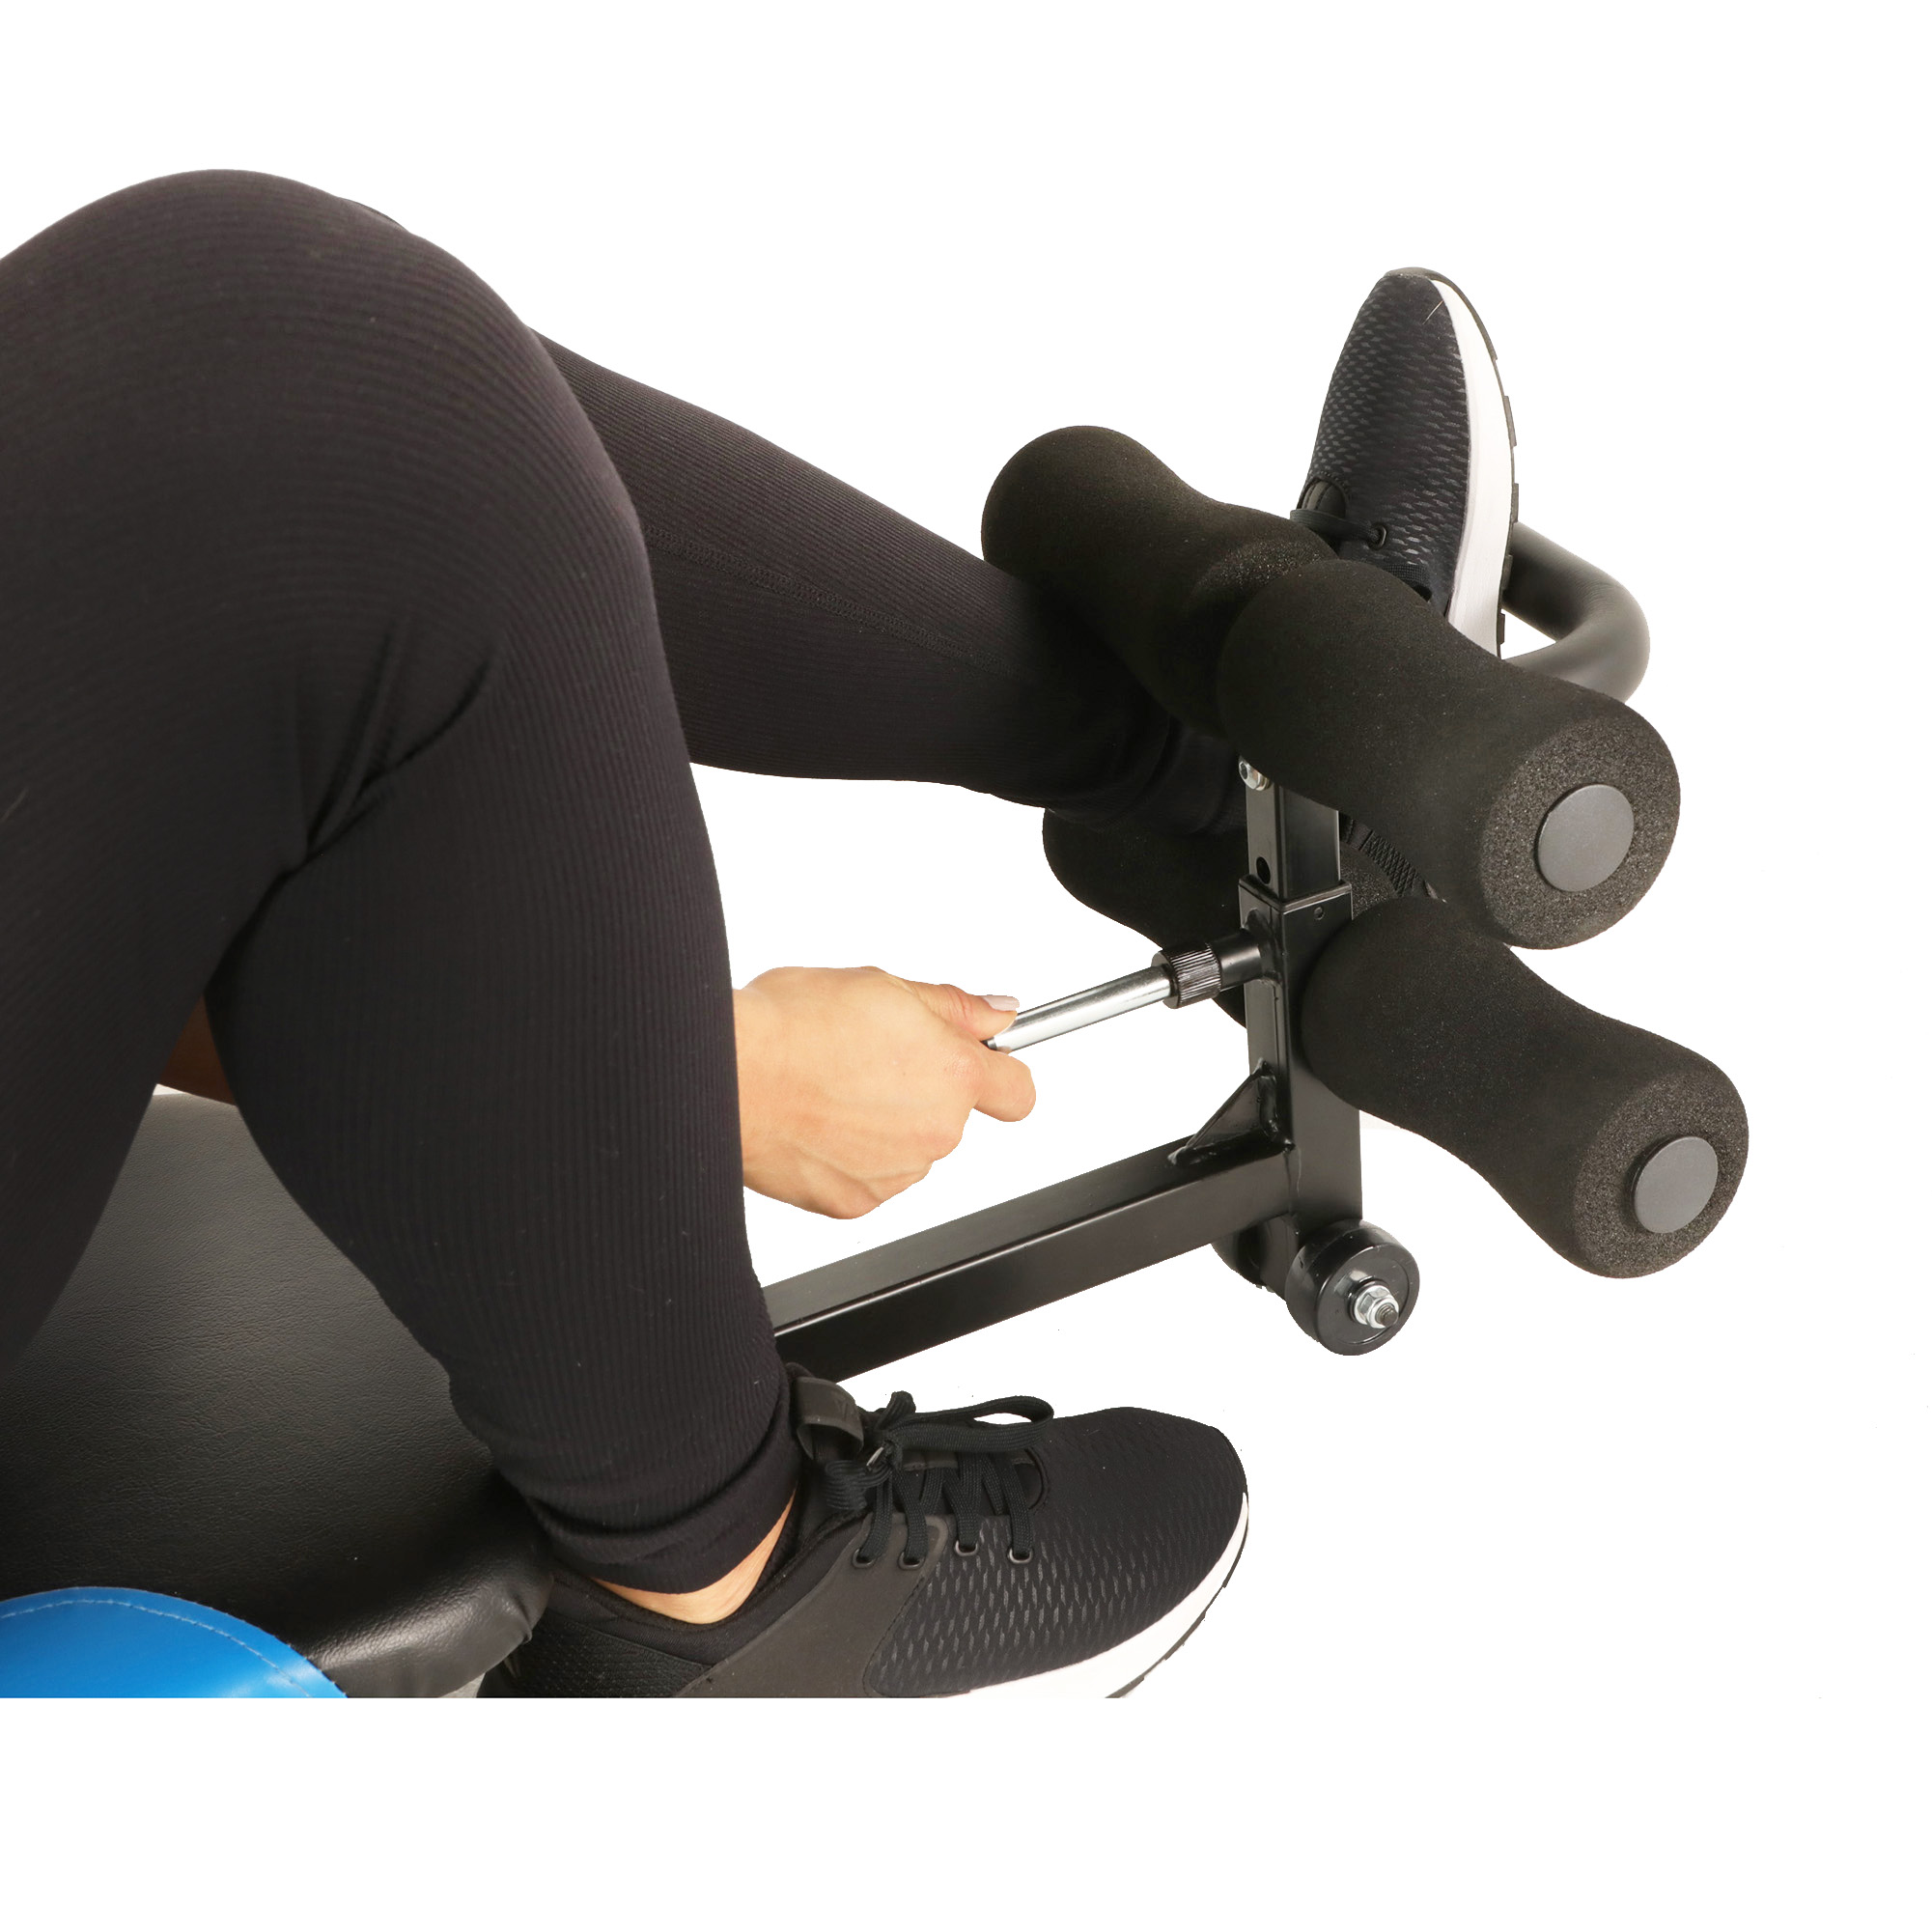 Exerpeutic 100 Back Stretch Traction Table Inversion Alternative with 300 Lbs. Weight Capacity - image 2 of 6